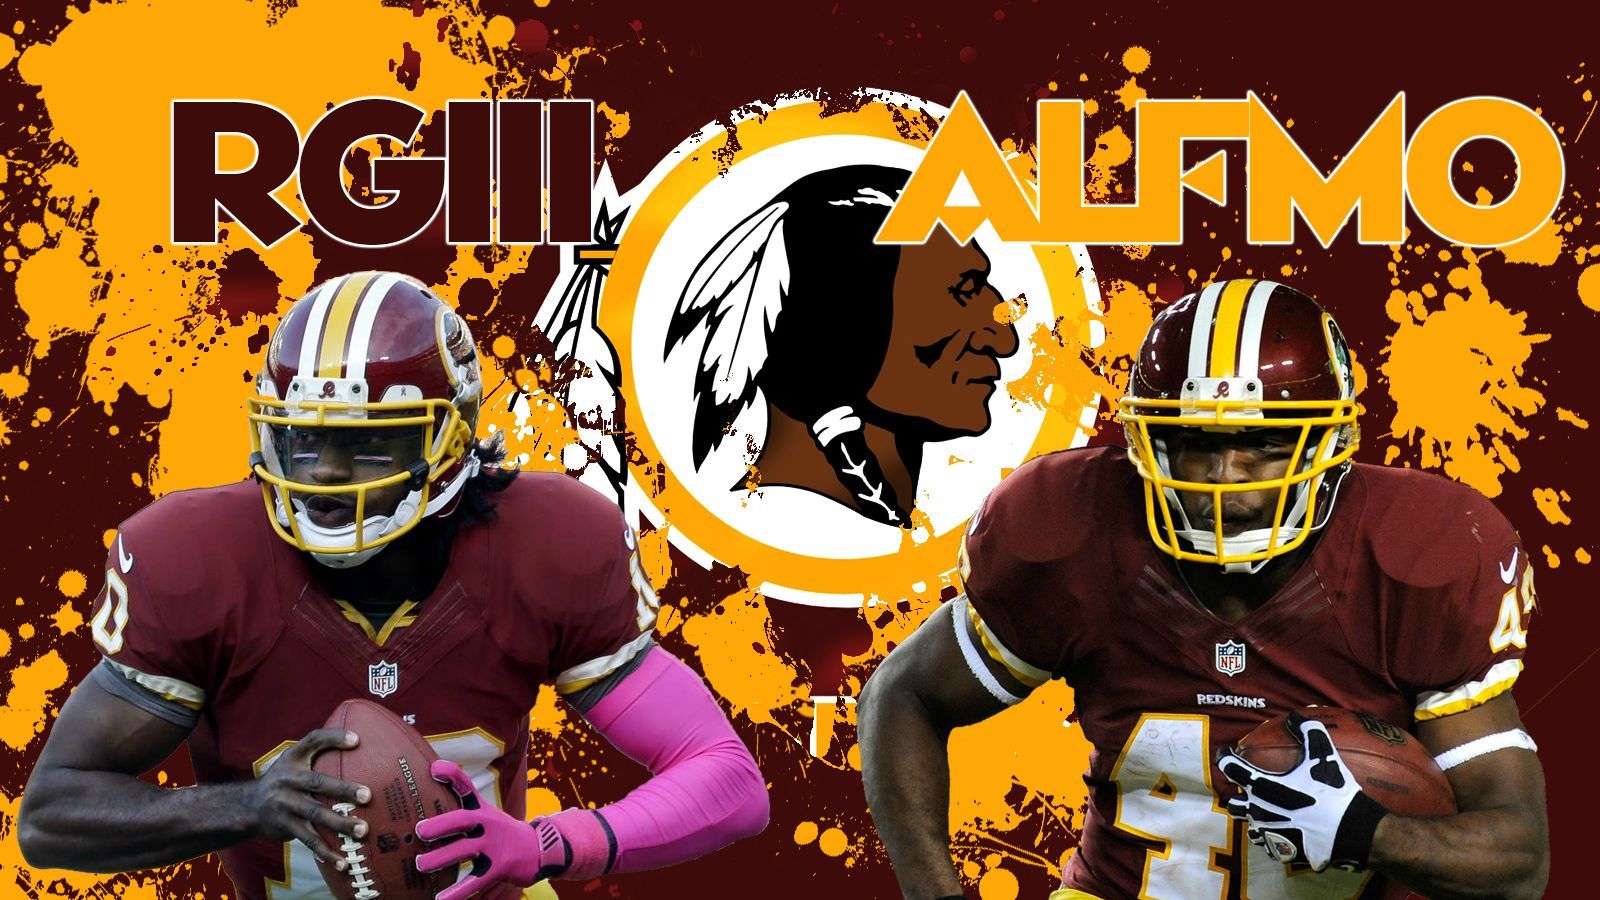 Redskins Wallpaper for iPhone 1600x900